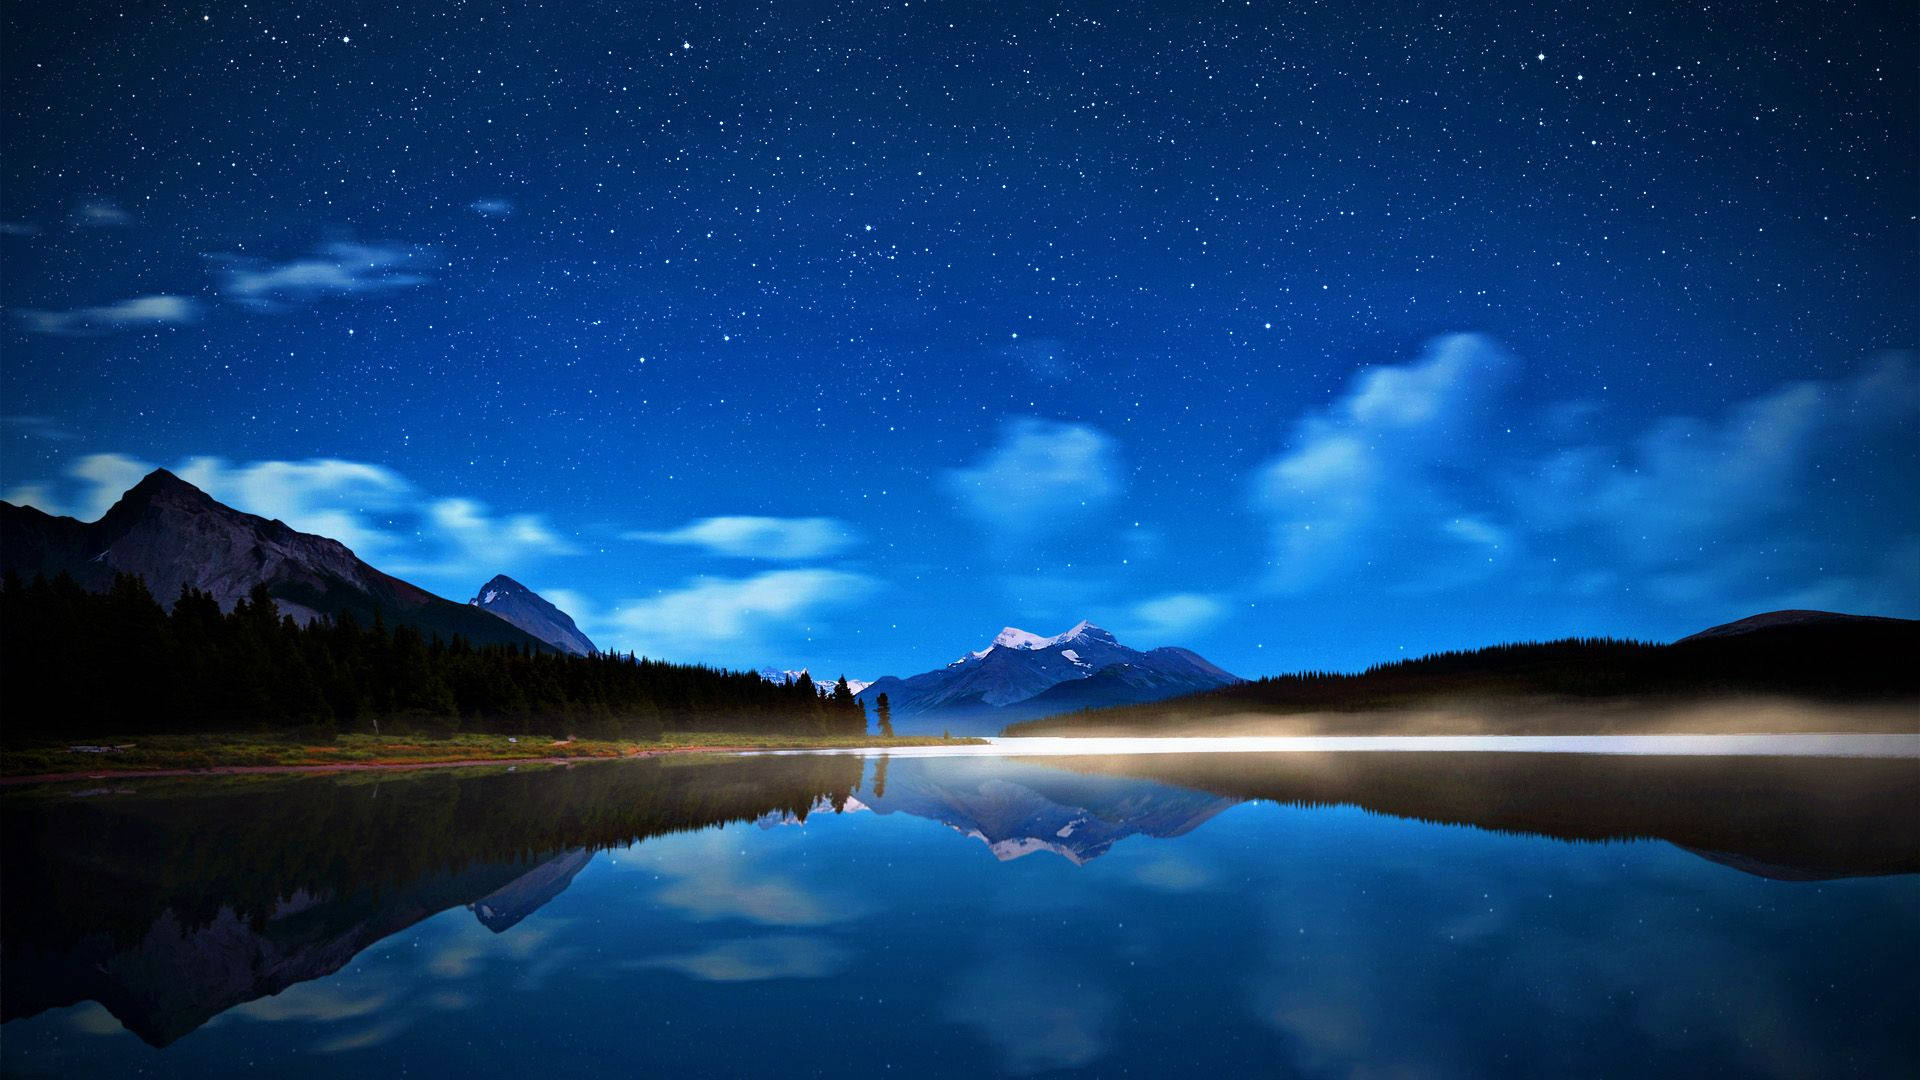 Blue Aesthetic Cloud On A Starry Night Wallpaper